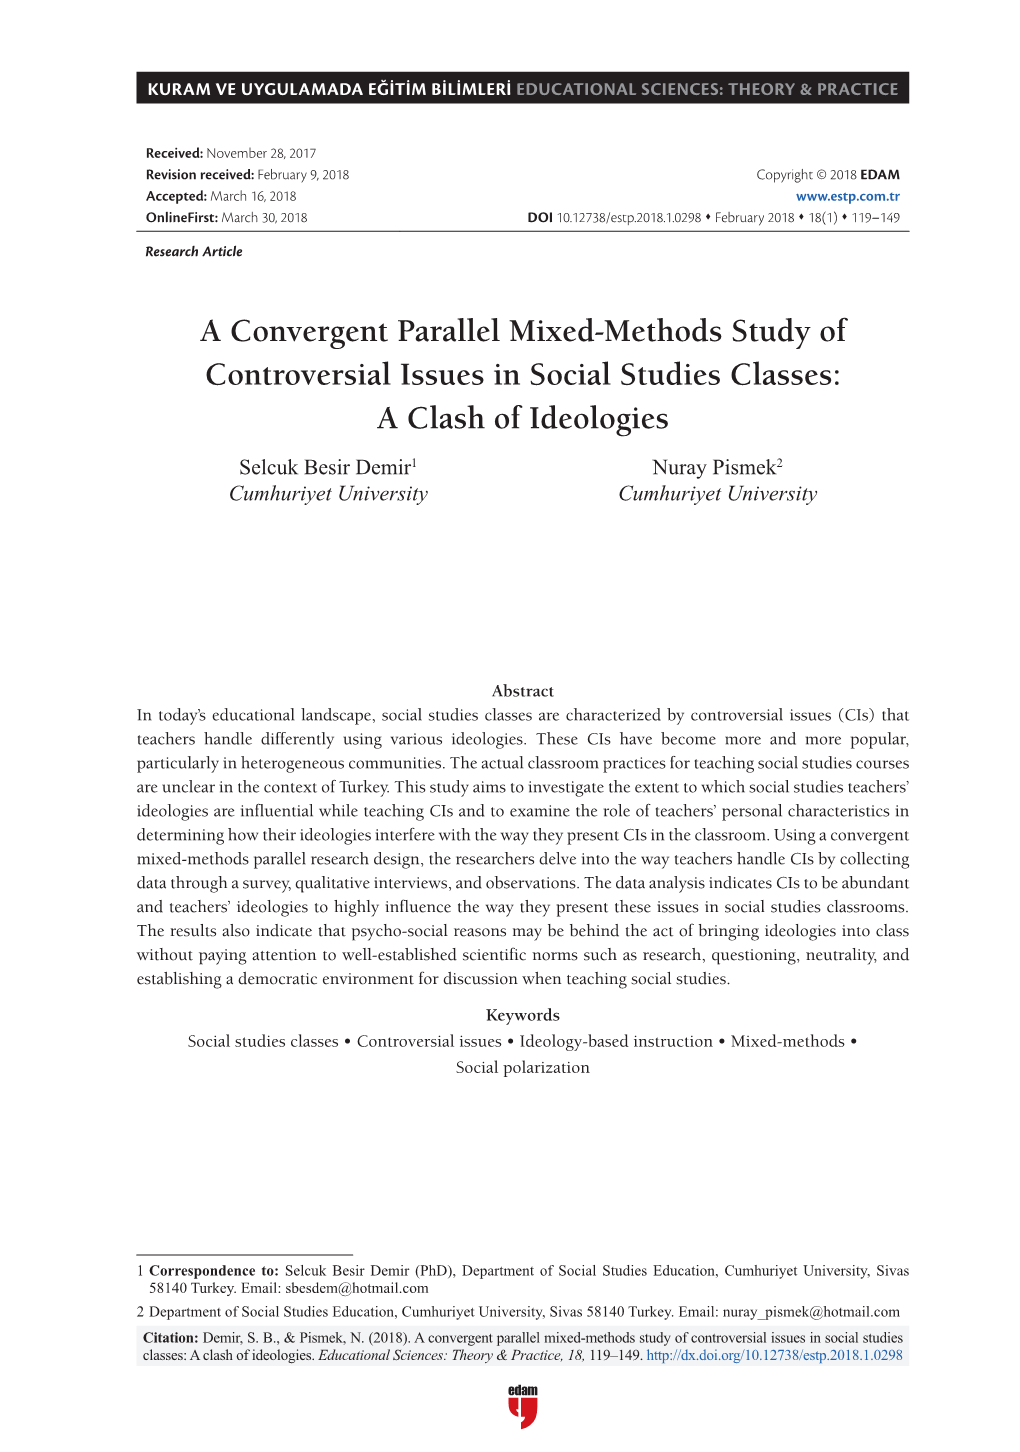 A Convergent Parallel Mixed-Methods Study of Controversial Issues in Social Studies Classes: a Clash of Ideologies